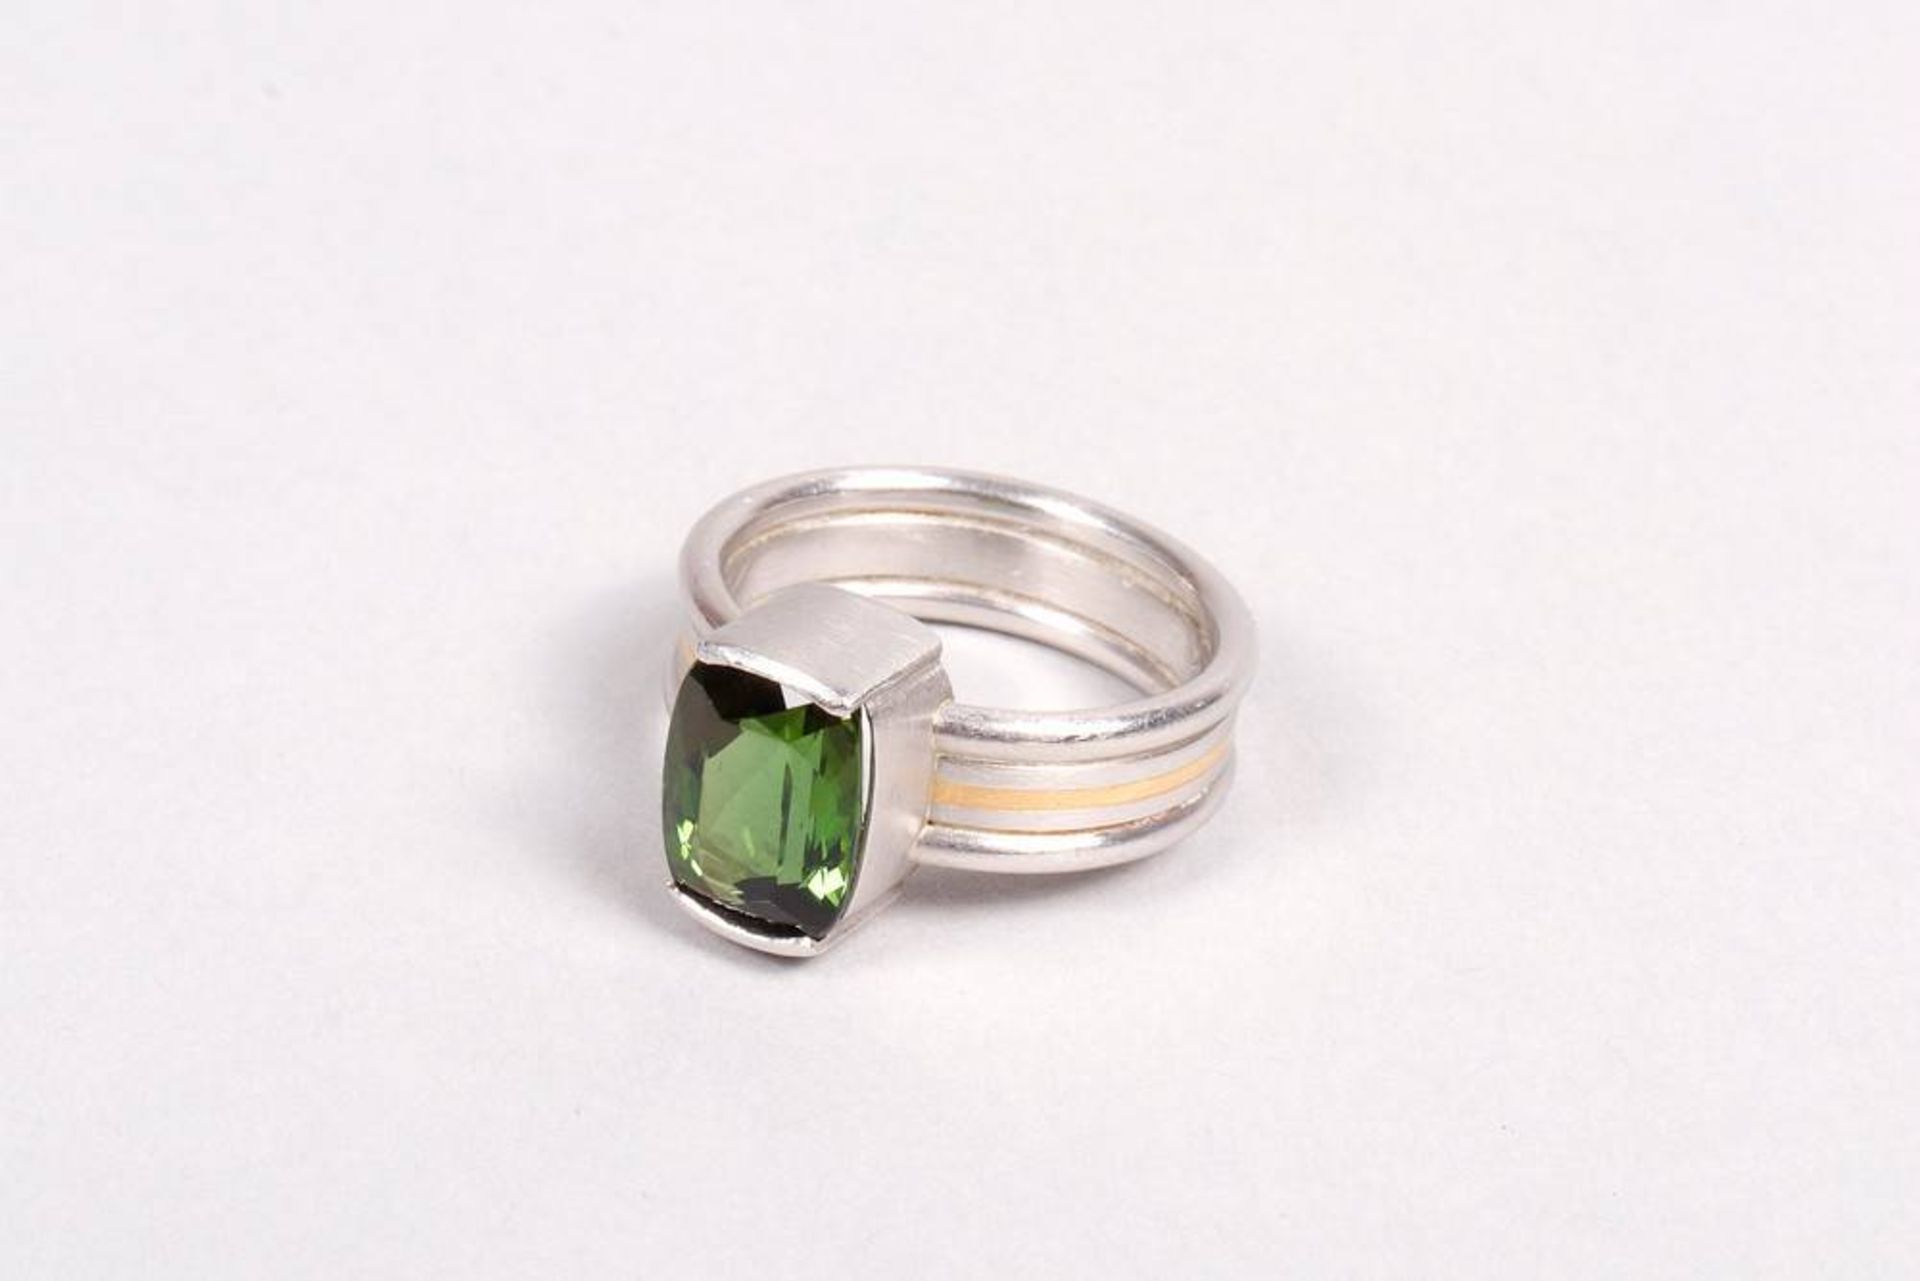 Very fine peridot ring, platinum and gold - Image 2 of 4